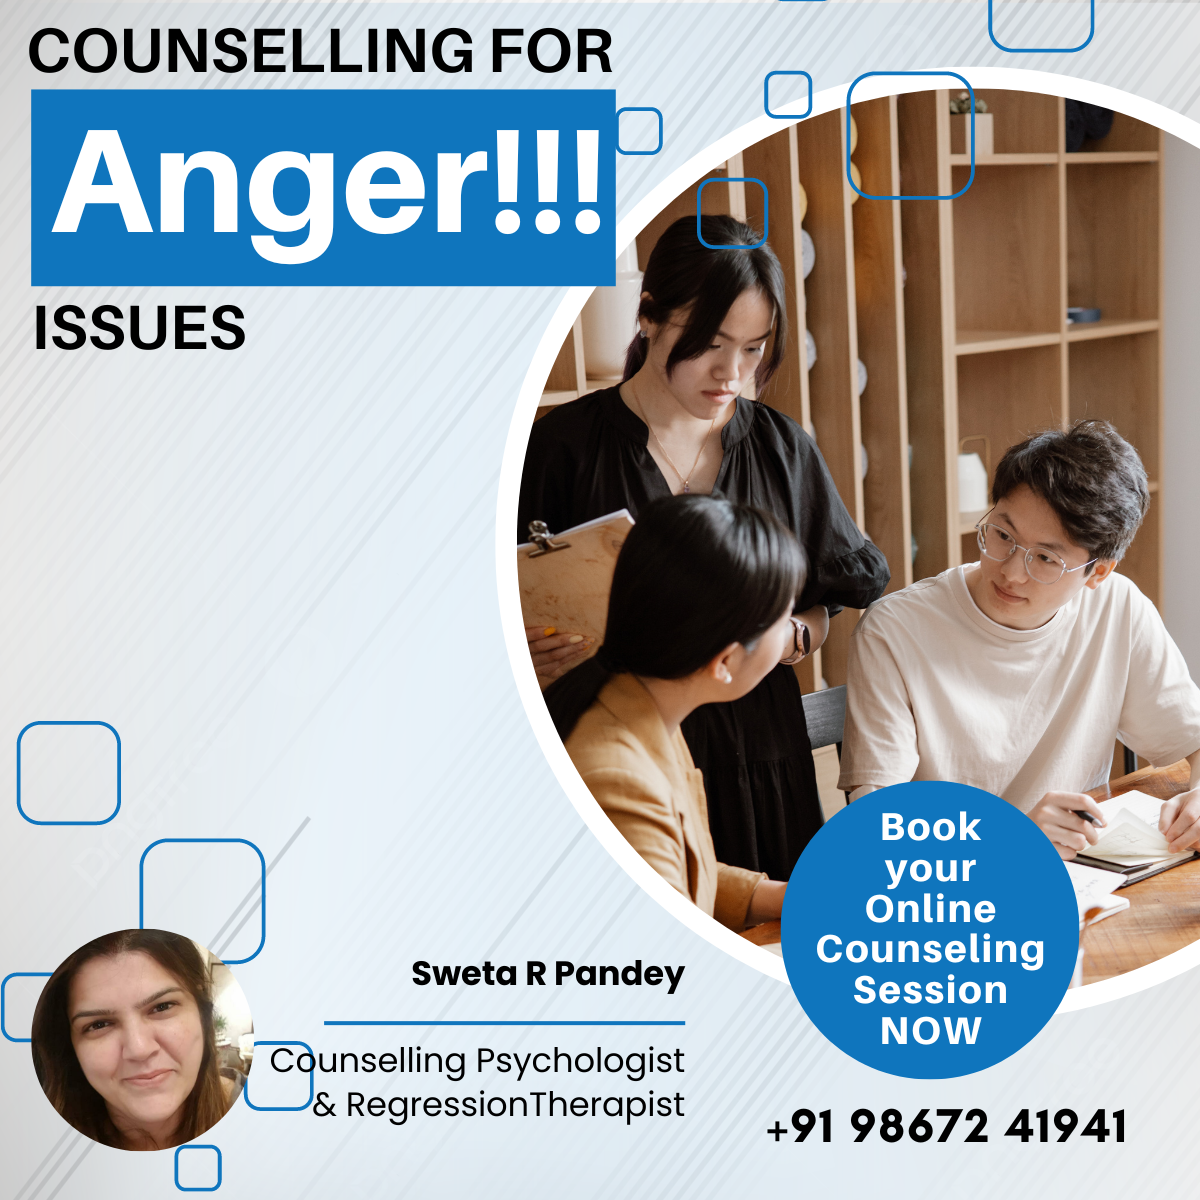 Counselling for Anger Issues - Sweta R Pandey - Mumbai